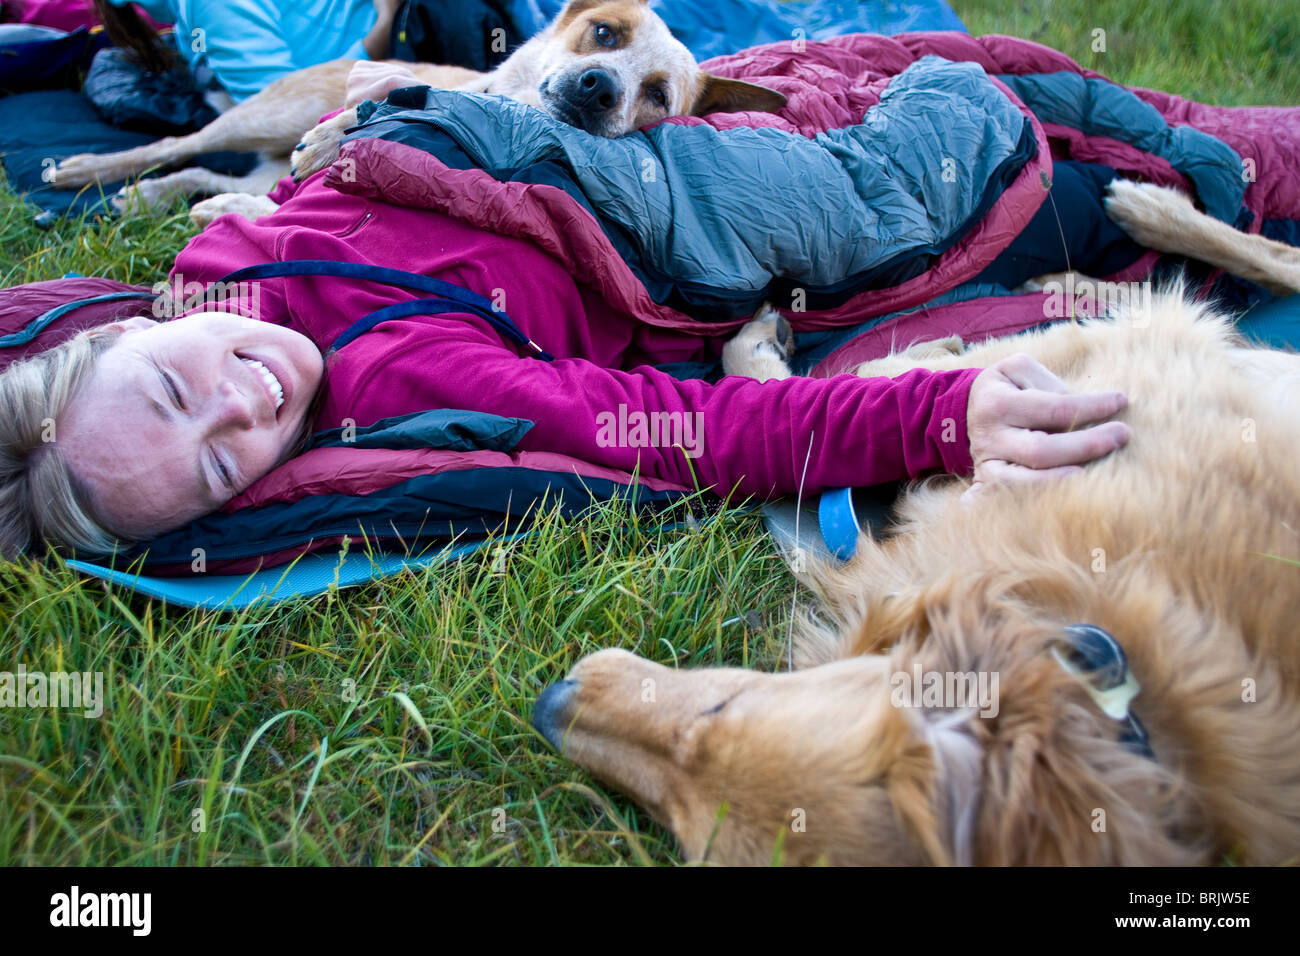 A woman curls up with her dogs during a summer sleep out. Stock Photo